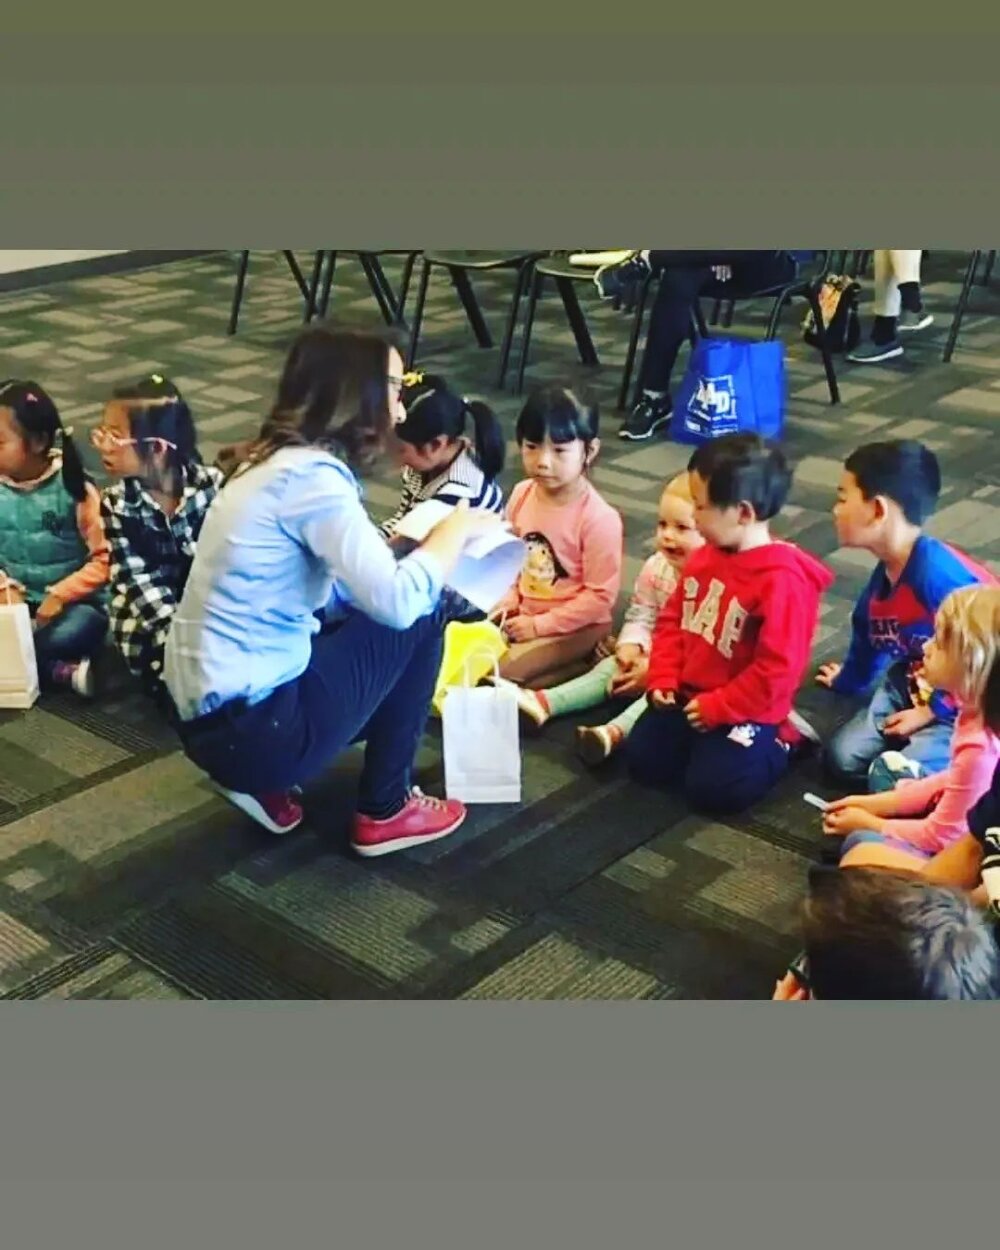 💜 Protect Our Children 💜

I volunteered in my children's classes and on field trips. I raised funds to teach art for K-6 at their school. These are pictures of my children book reading at a Sacramento library and a Davis bookstore.

I'm feeling hea